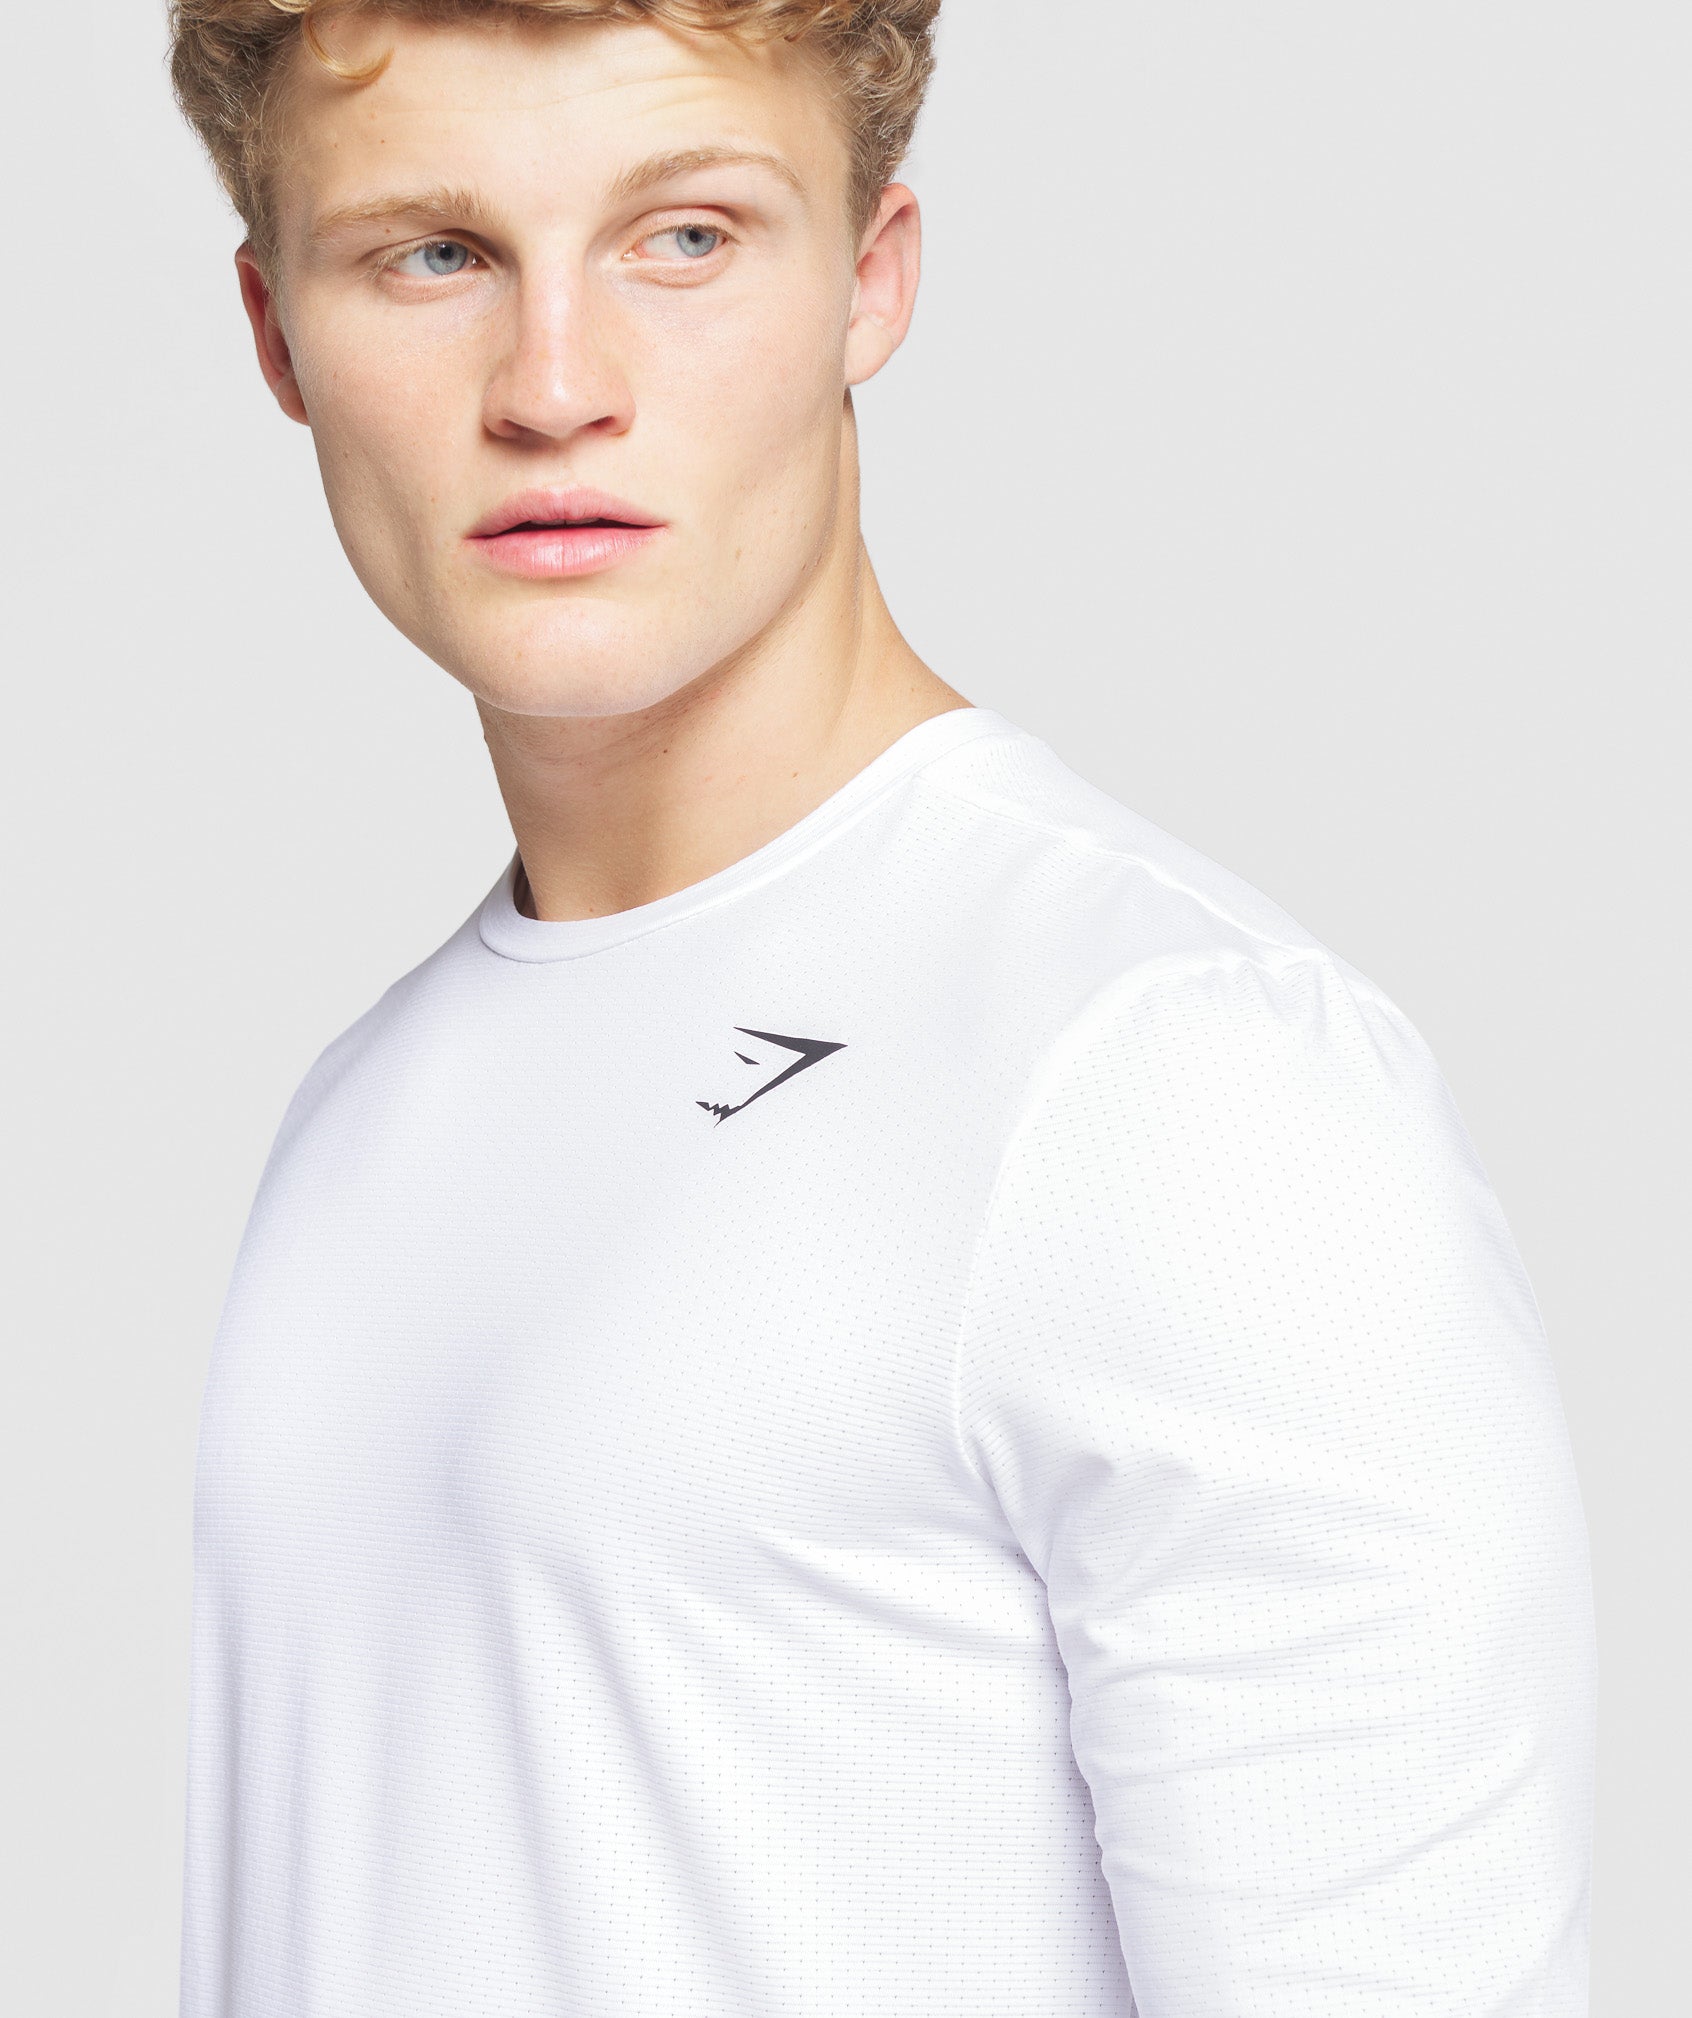 Arrival Long Sleeve T-Shirt in White - view 6